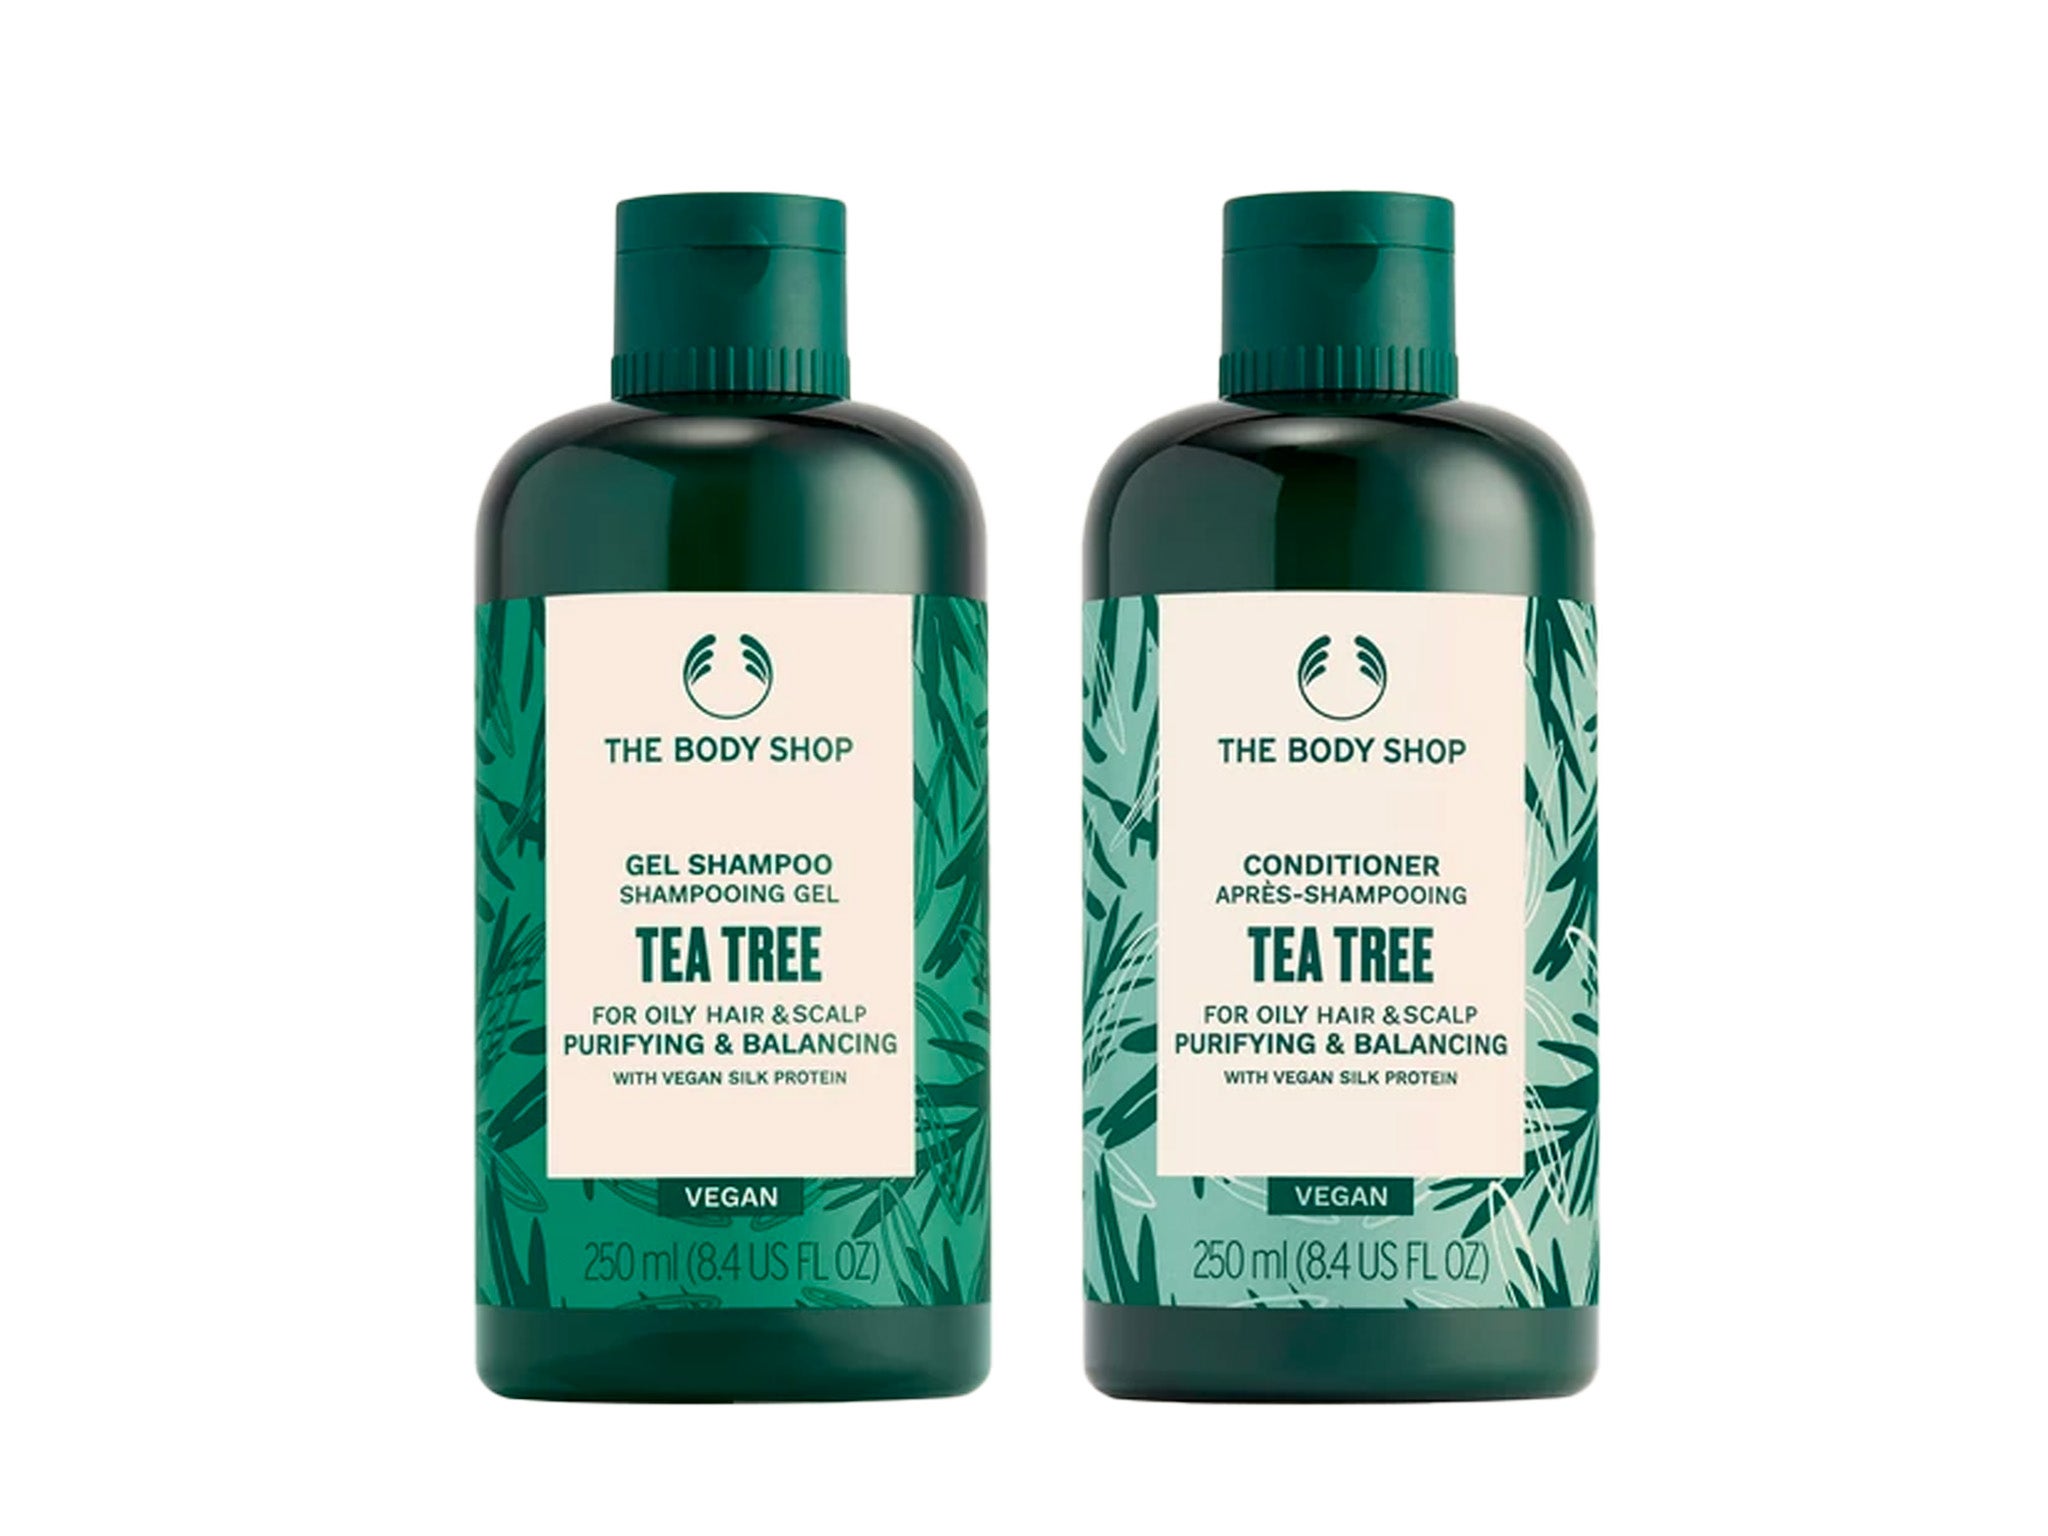 The Body Shop tea tree purifying and balancing shampoo and conditioner